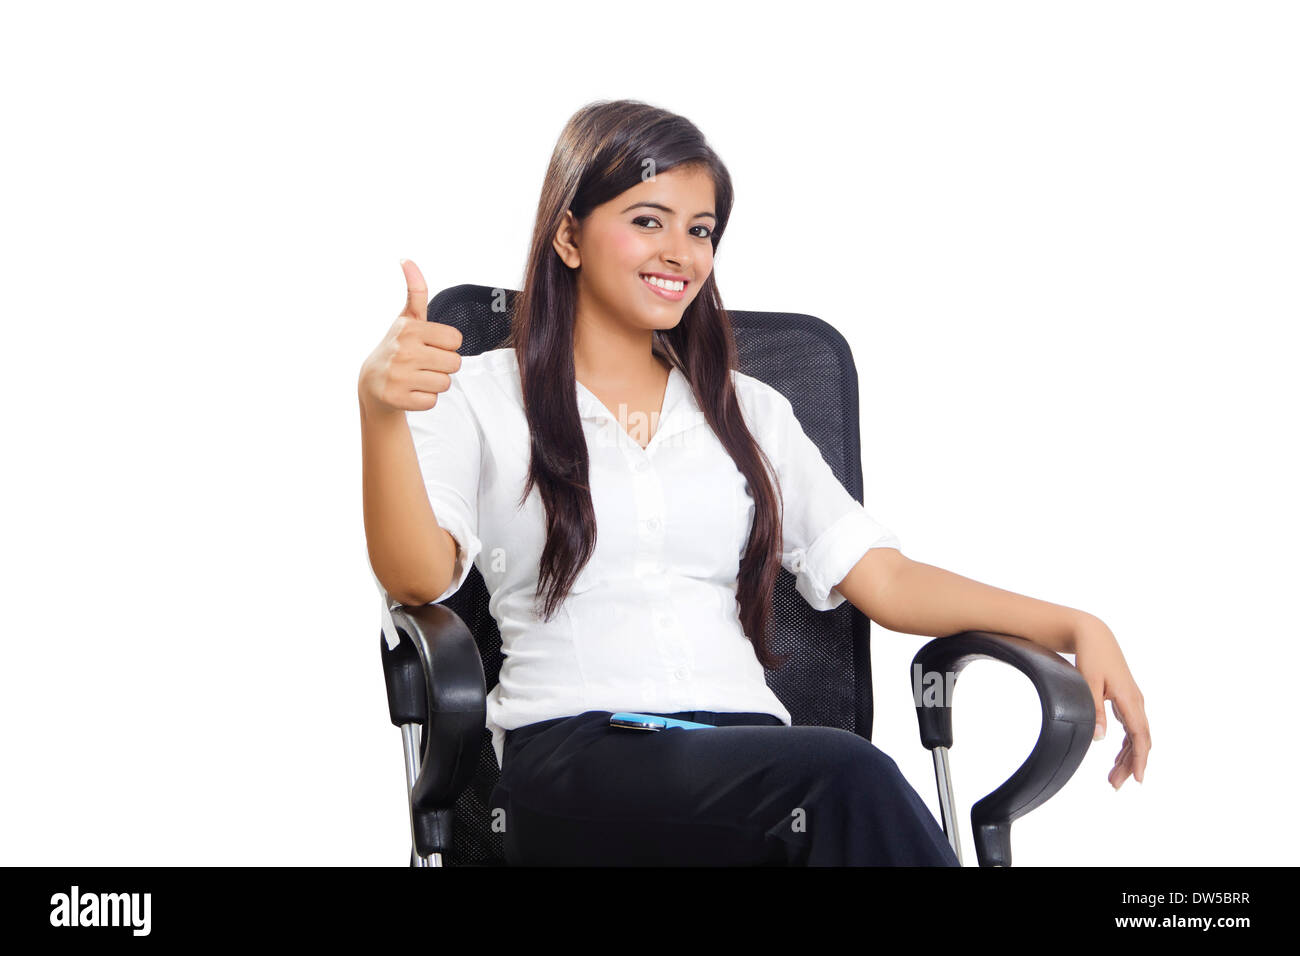 indian Business Woman Sitting chair Stock Photo, Royalty ...